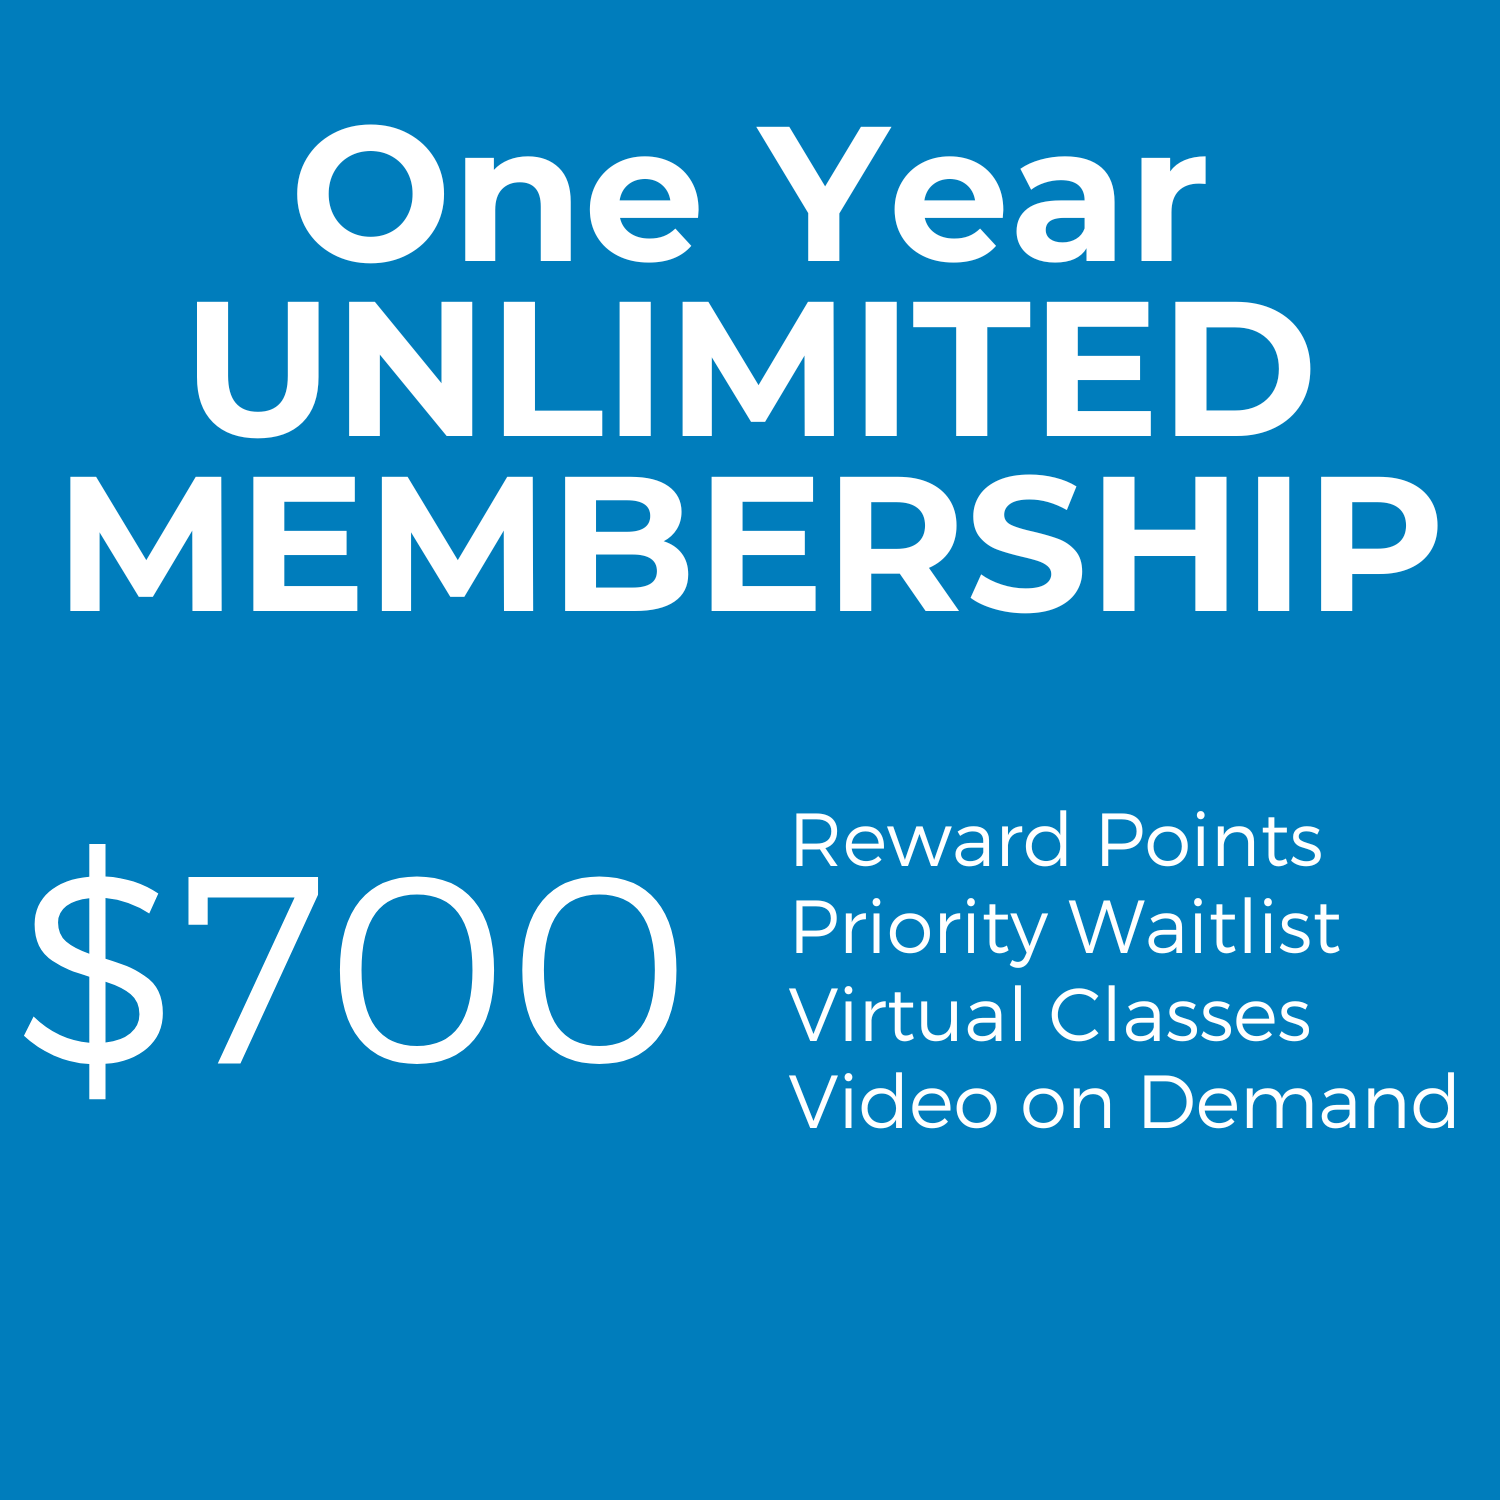 One Year Unlimited Membership